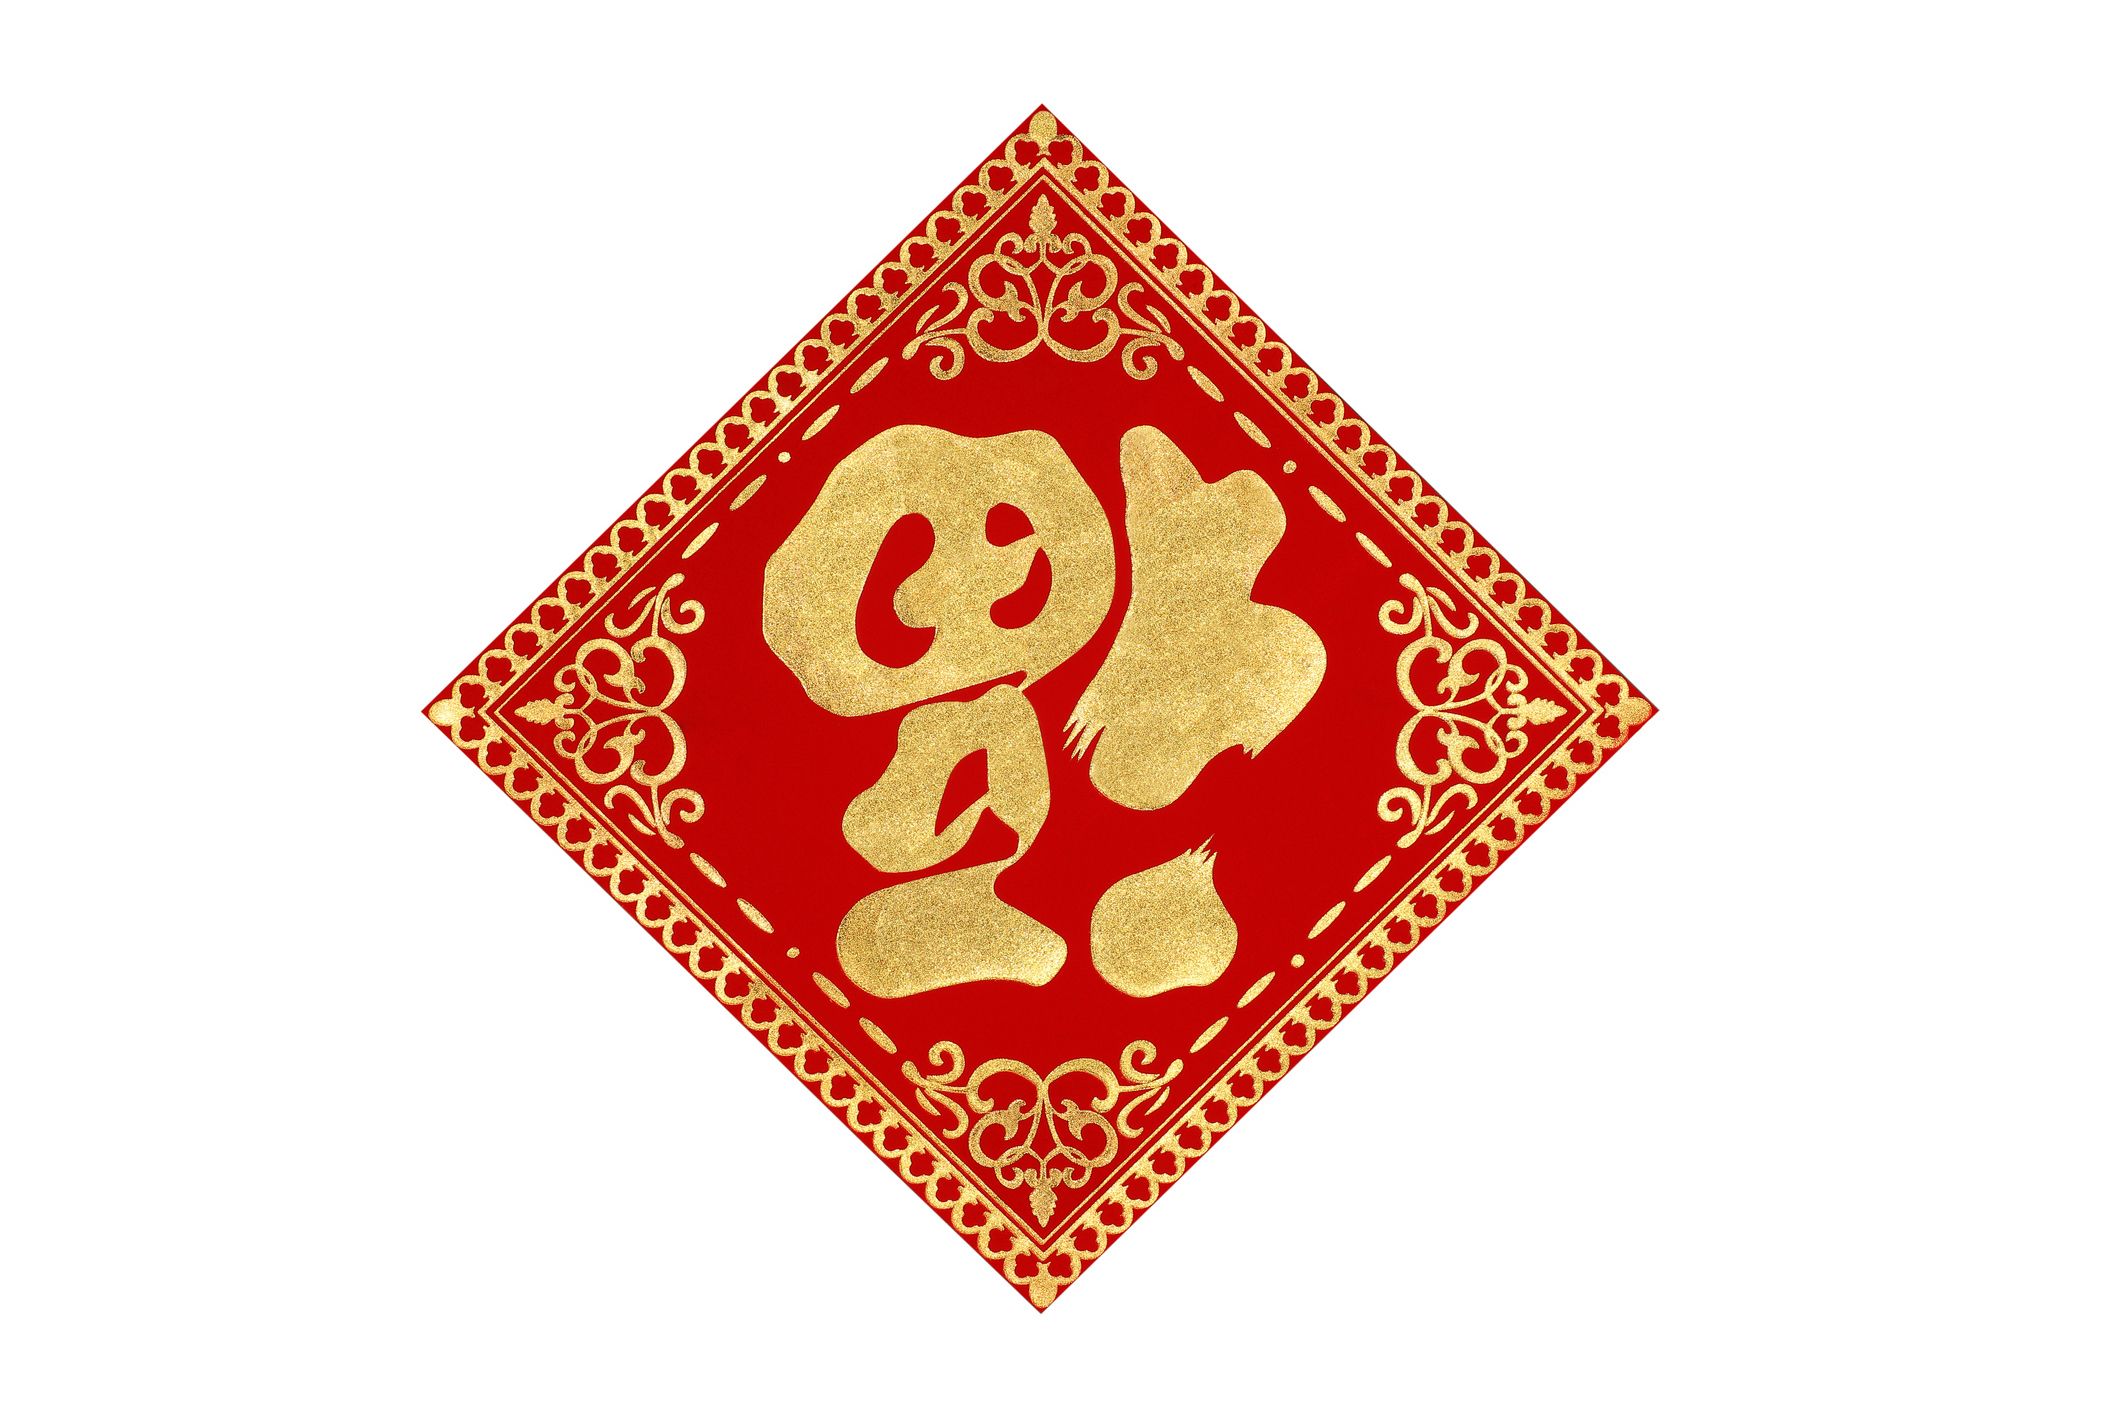 Chinese New Year Decorations 2023 — 7 Lunar New Year Ideas